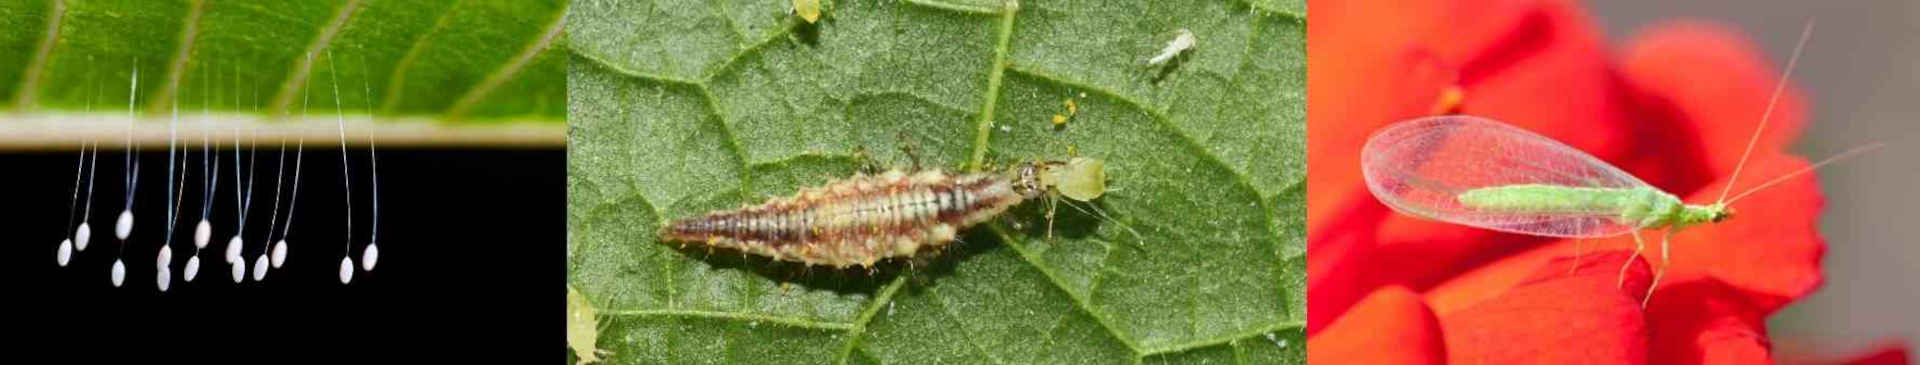 5 Ways to Attract Aphid-Loving Lacewings to Your Garden